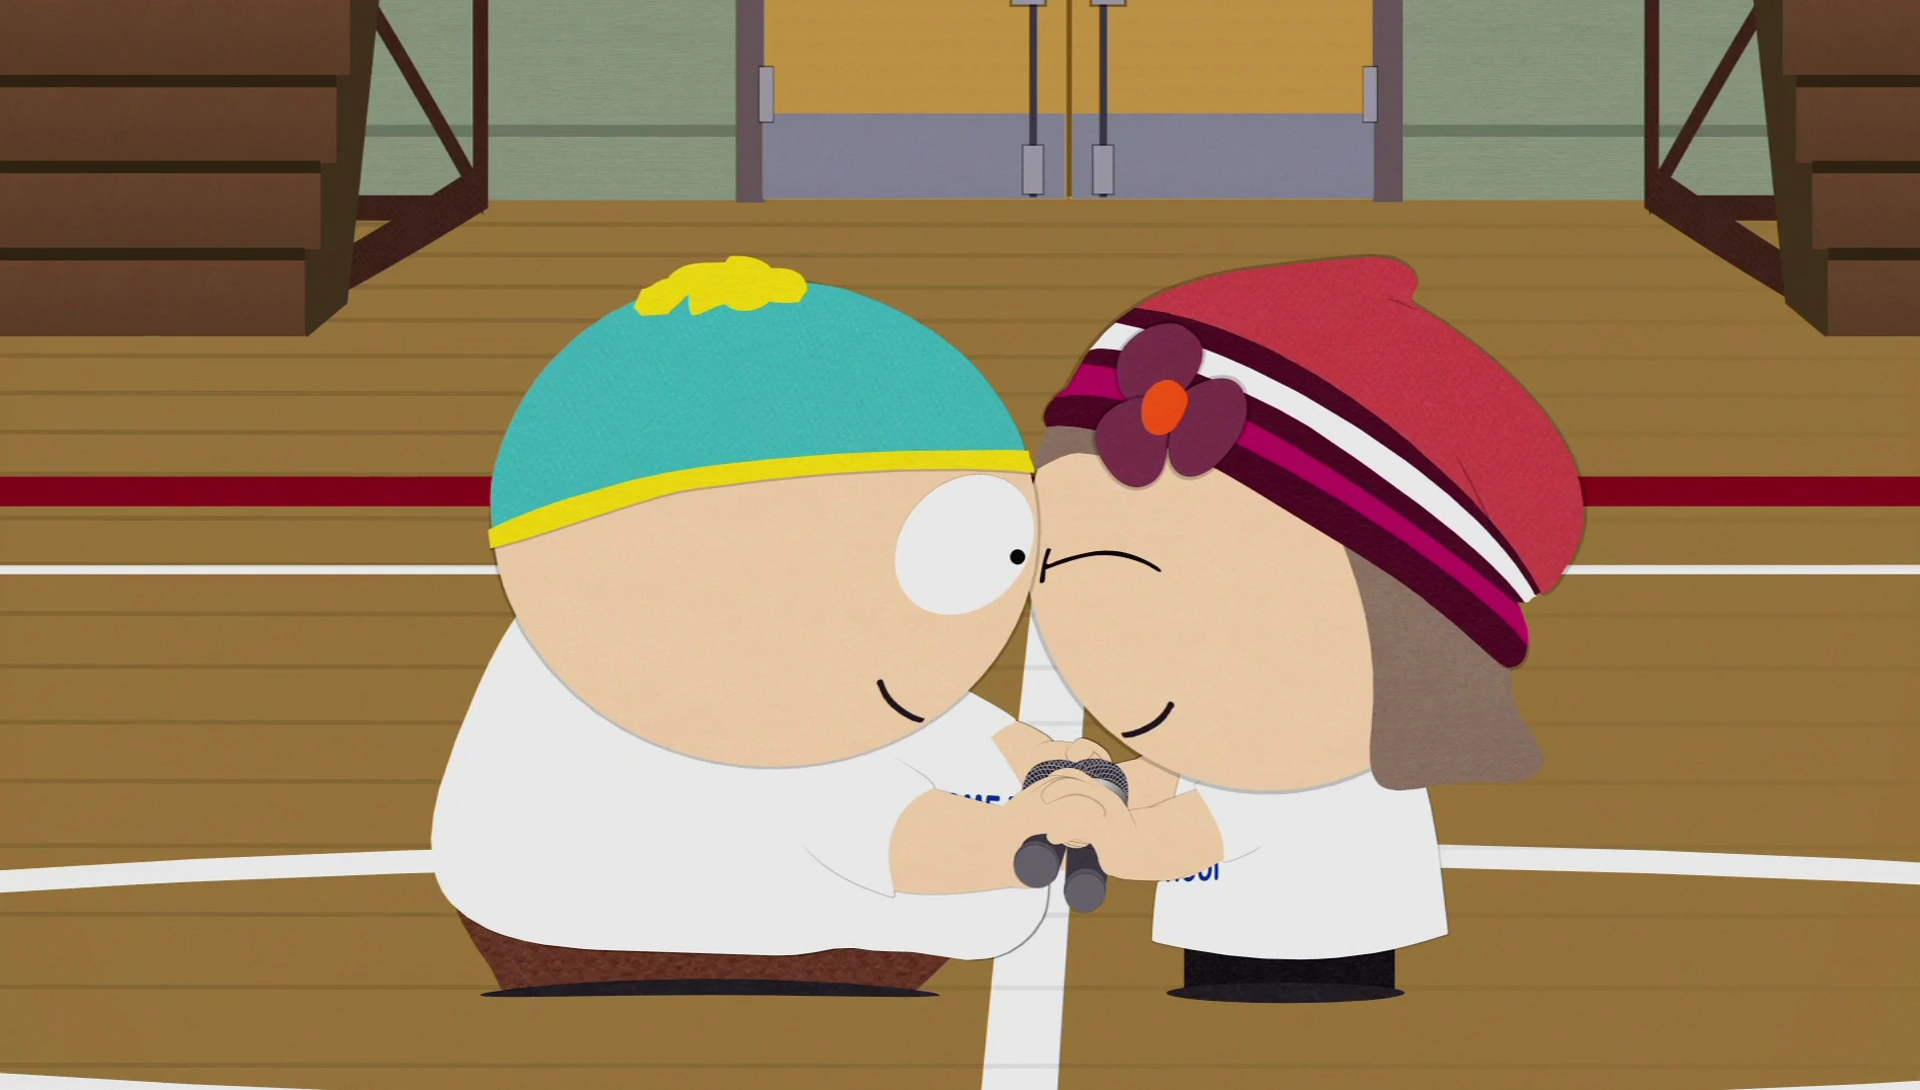 Are Heidi and Cartman still Together?